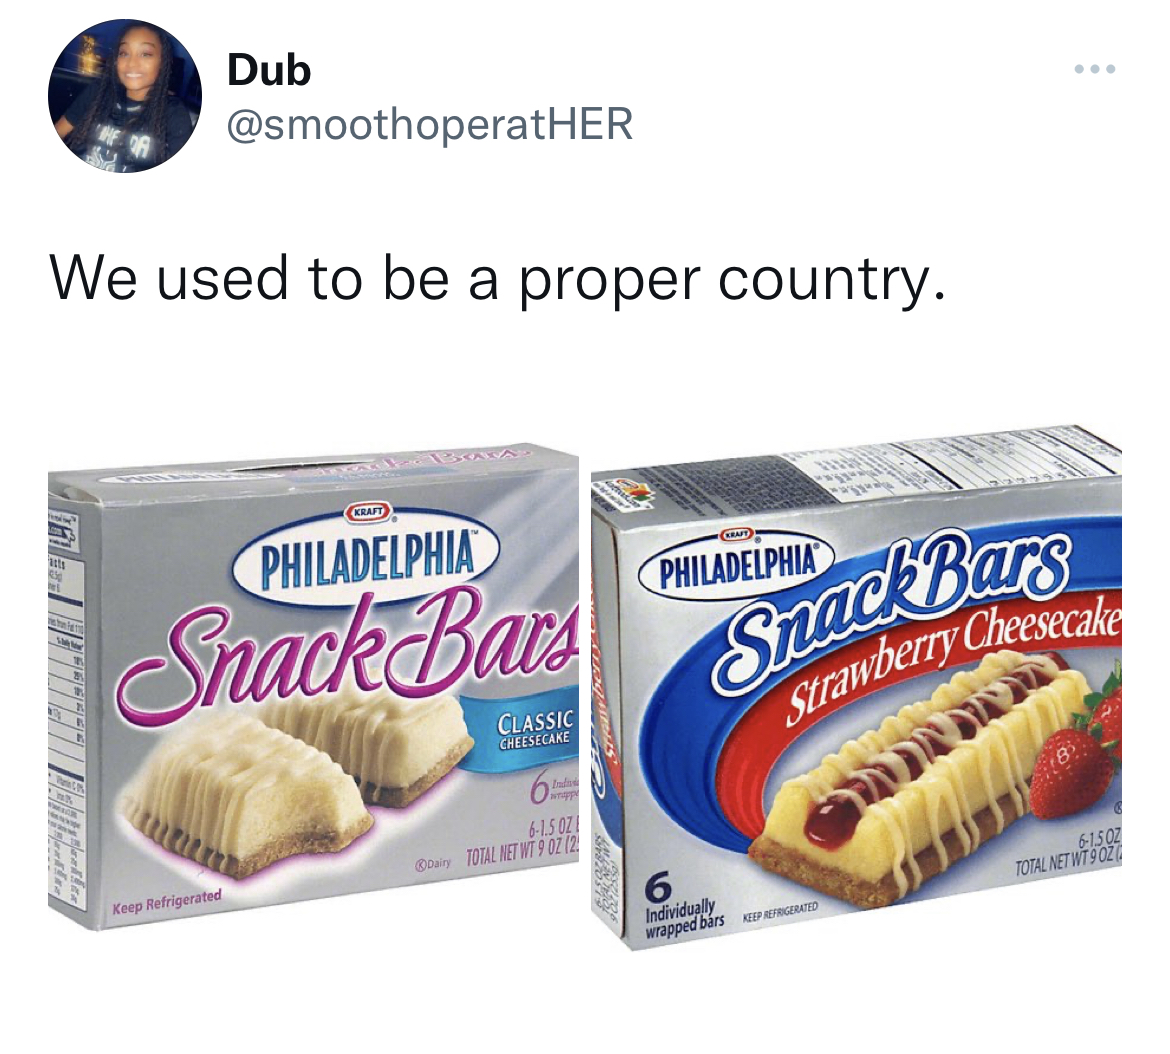 Tweets of the week - philadelphia snack bars - Dub We used to be a proper country. Keep Refriger Cety Philadelphia Snack Bars Classic Cheesecake 615021 D Total Rett FOX12 Samy Philadelphia Snack Bars Strawberry Cheesecake 6 Individually wrapped bars 61300